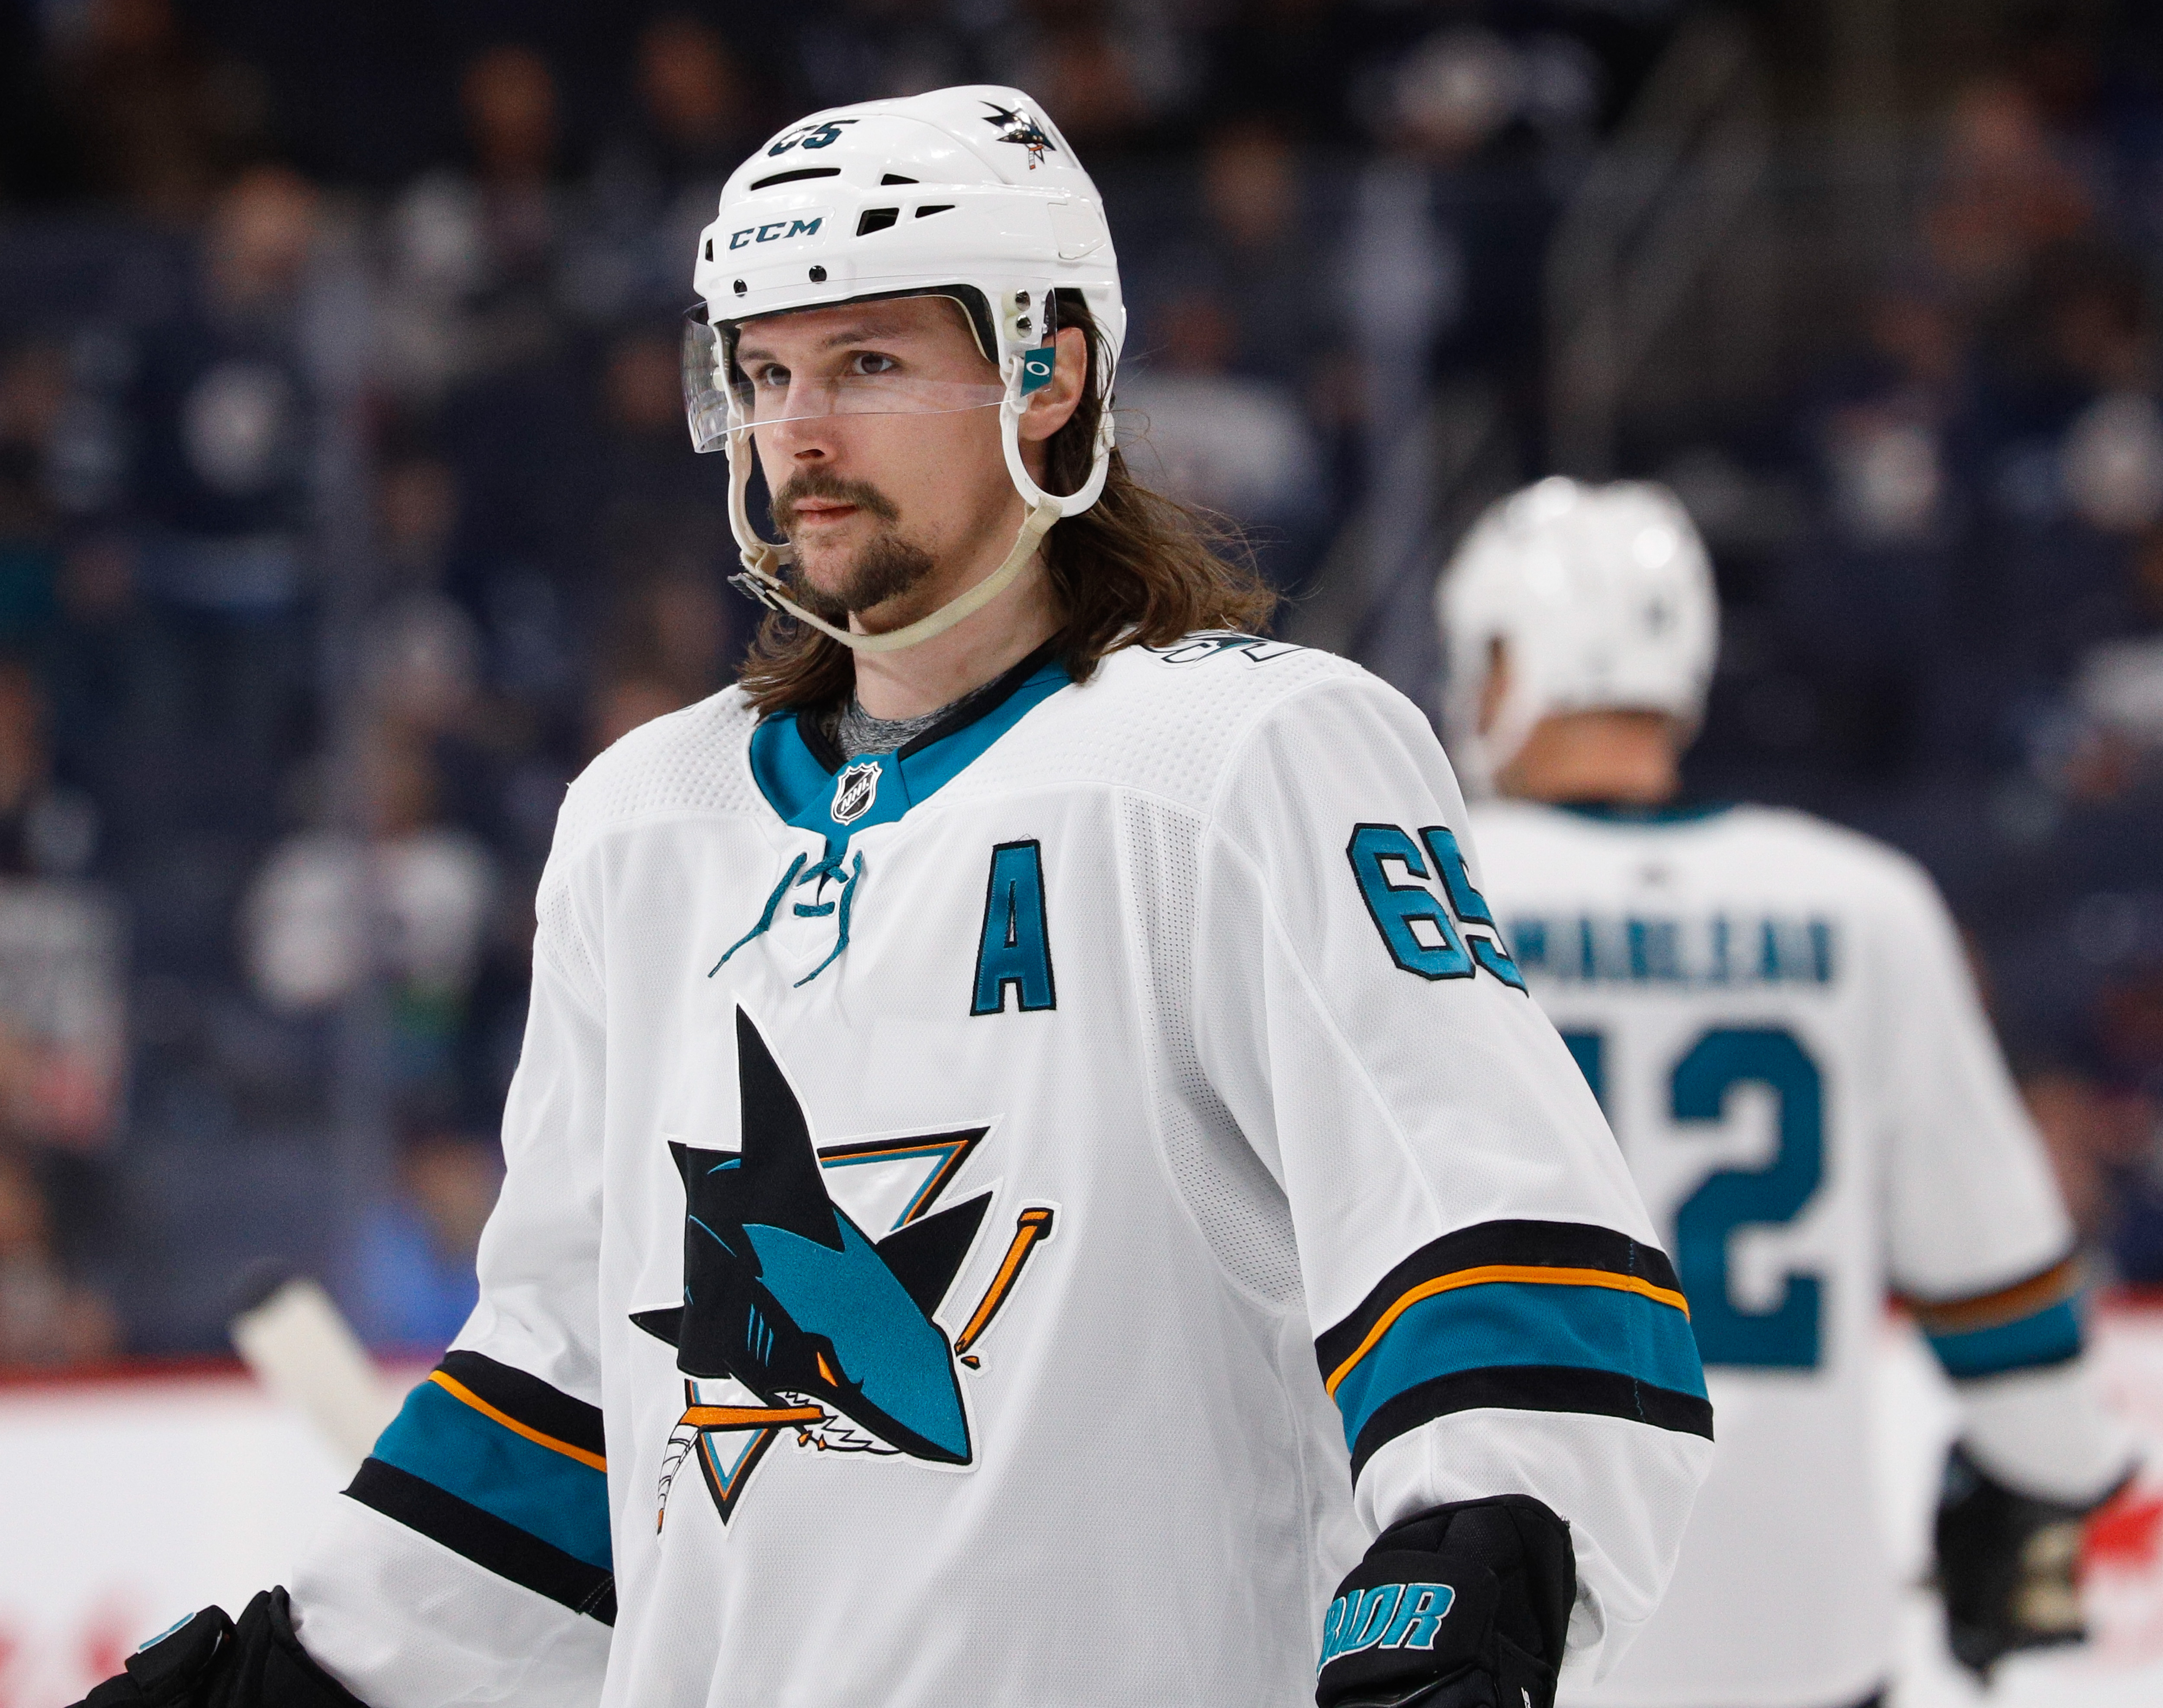 WINNIPEG, MB - FEBRUARY 14: Erik Karlsson #65 of the San Jose Sharks looks on during a first period stoppage in play against the Winnipeg Jets at the Bell MTS Place on February 14, 2020 in Winnipeg, Manitoba, Canada. The Sharks defeated the Jets 3-2.